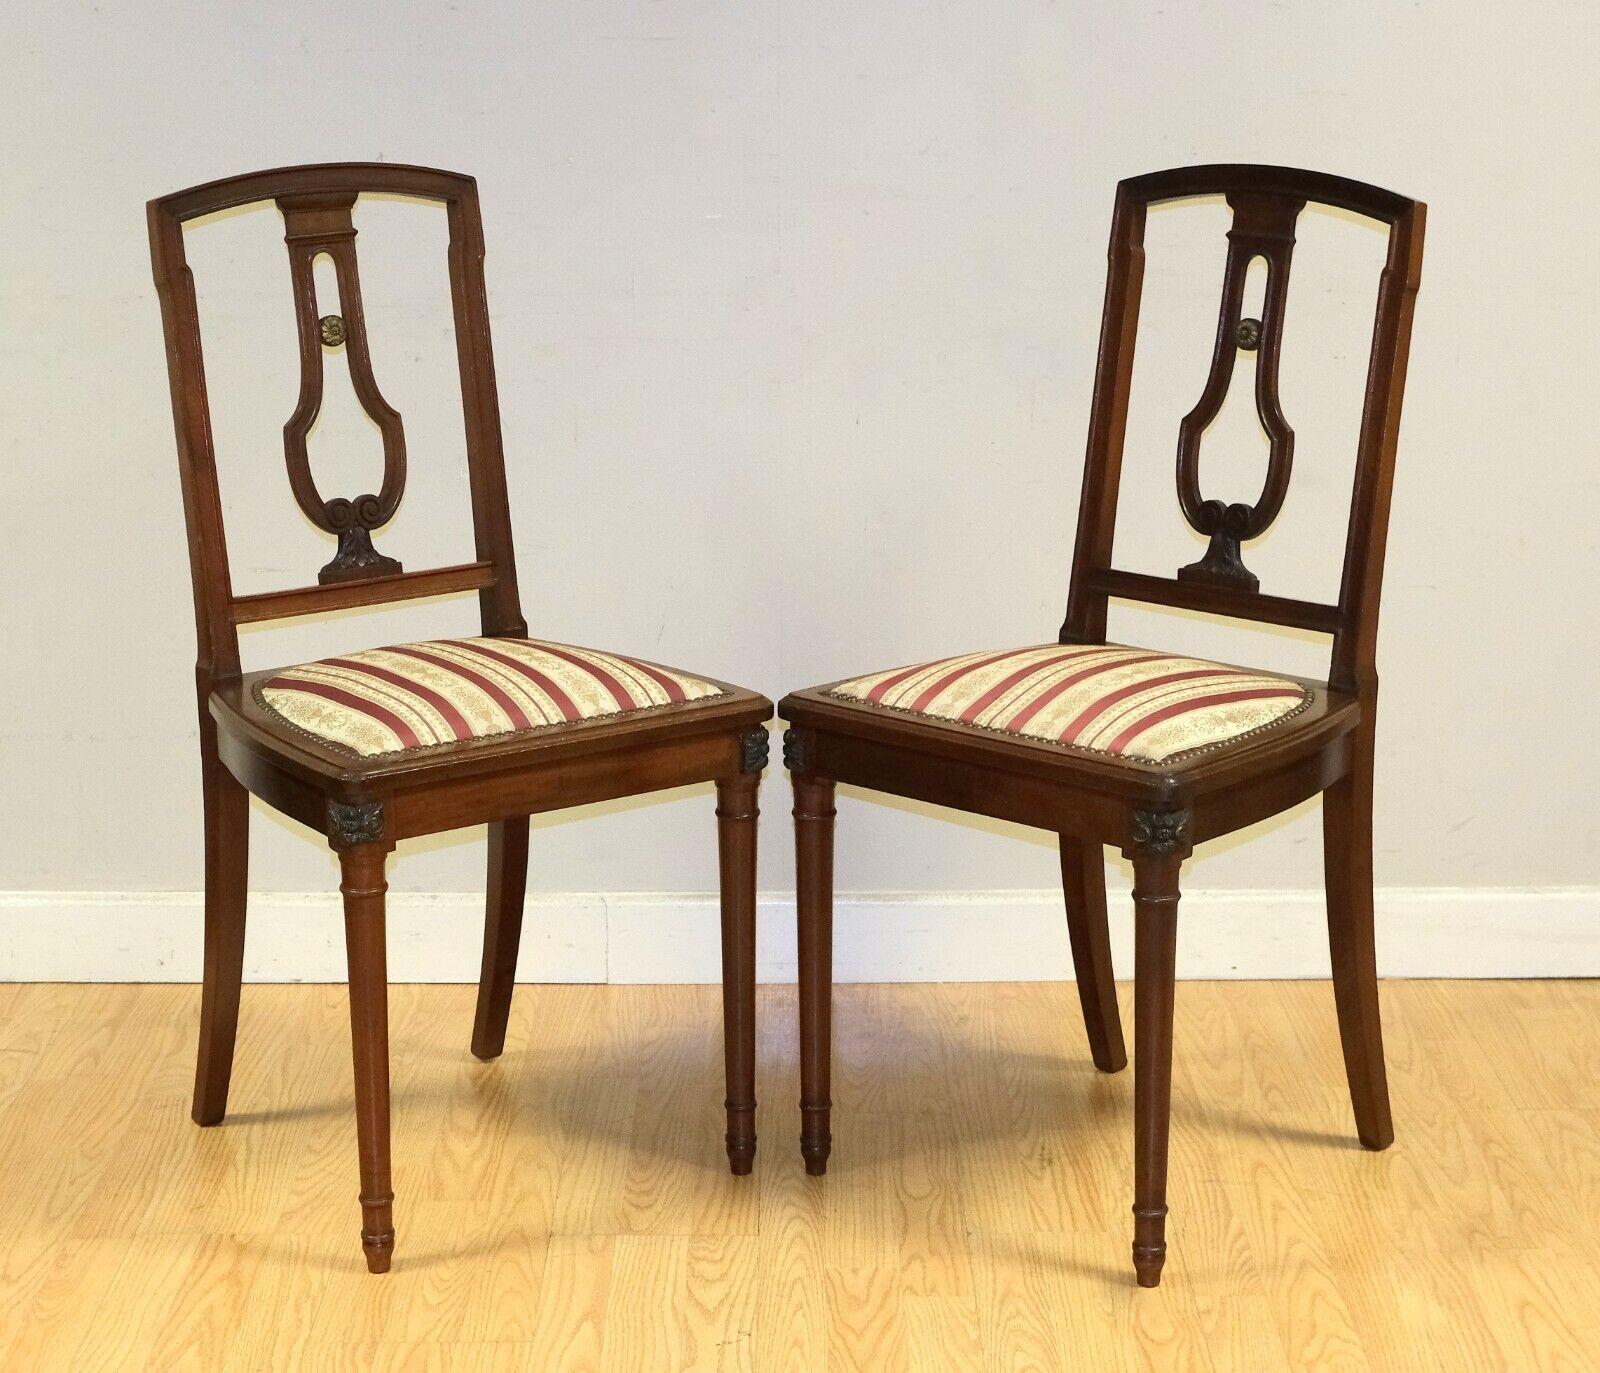 CHARMING PAIR OF OCCASIONAL HARDWOOD CHAIR WiTH STIPE FABRIC SEAT & STUDS For Sale 5